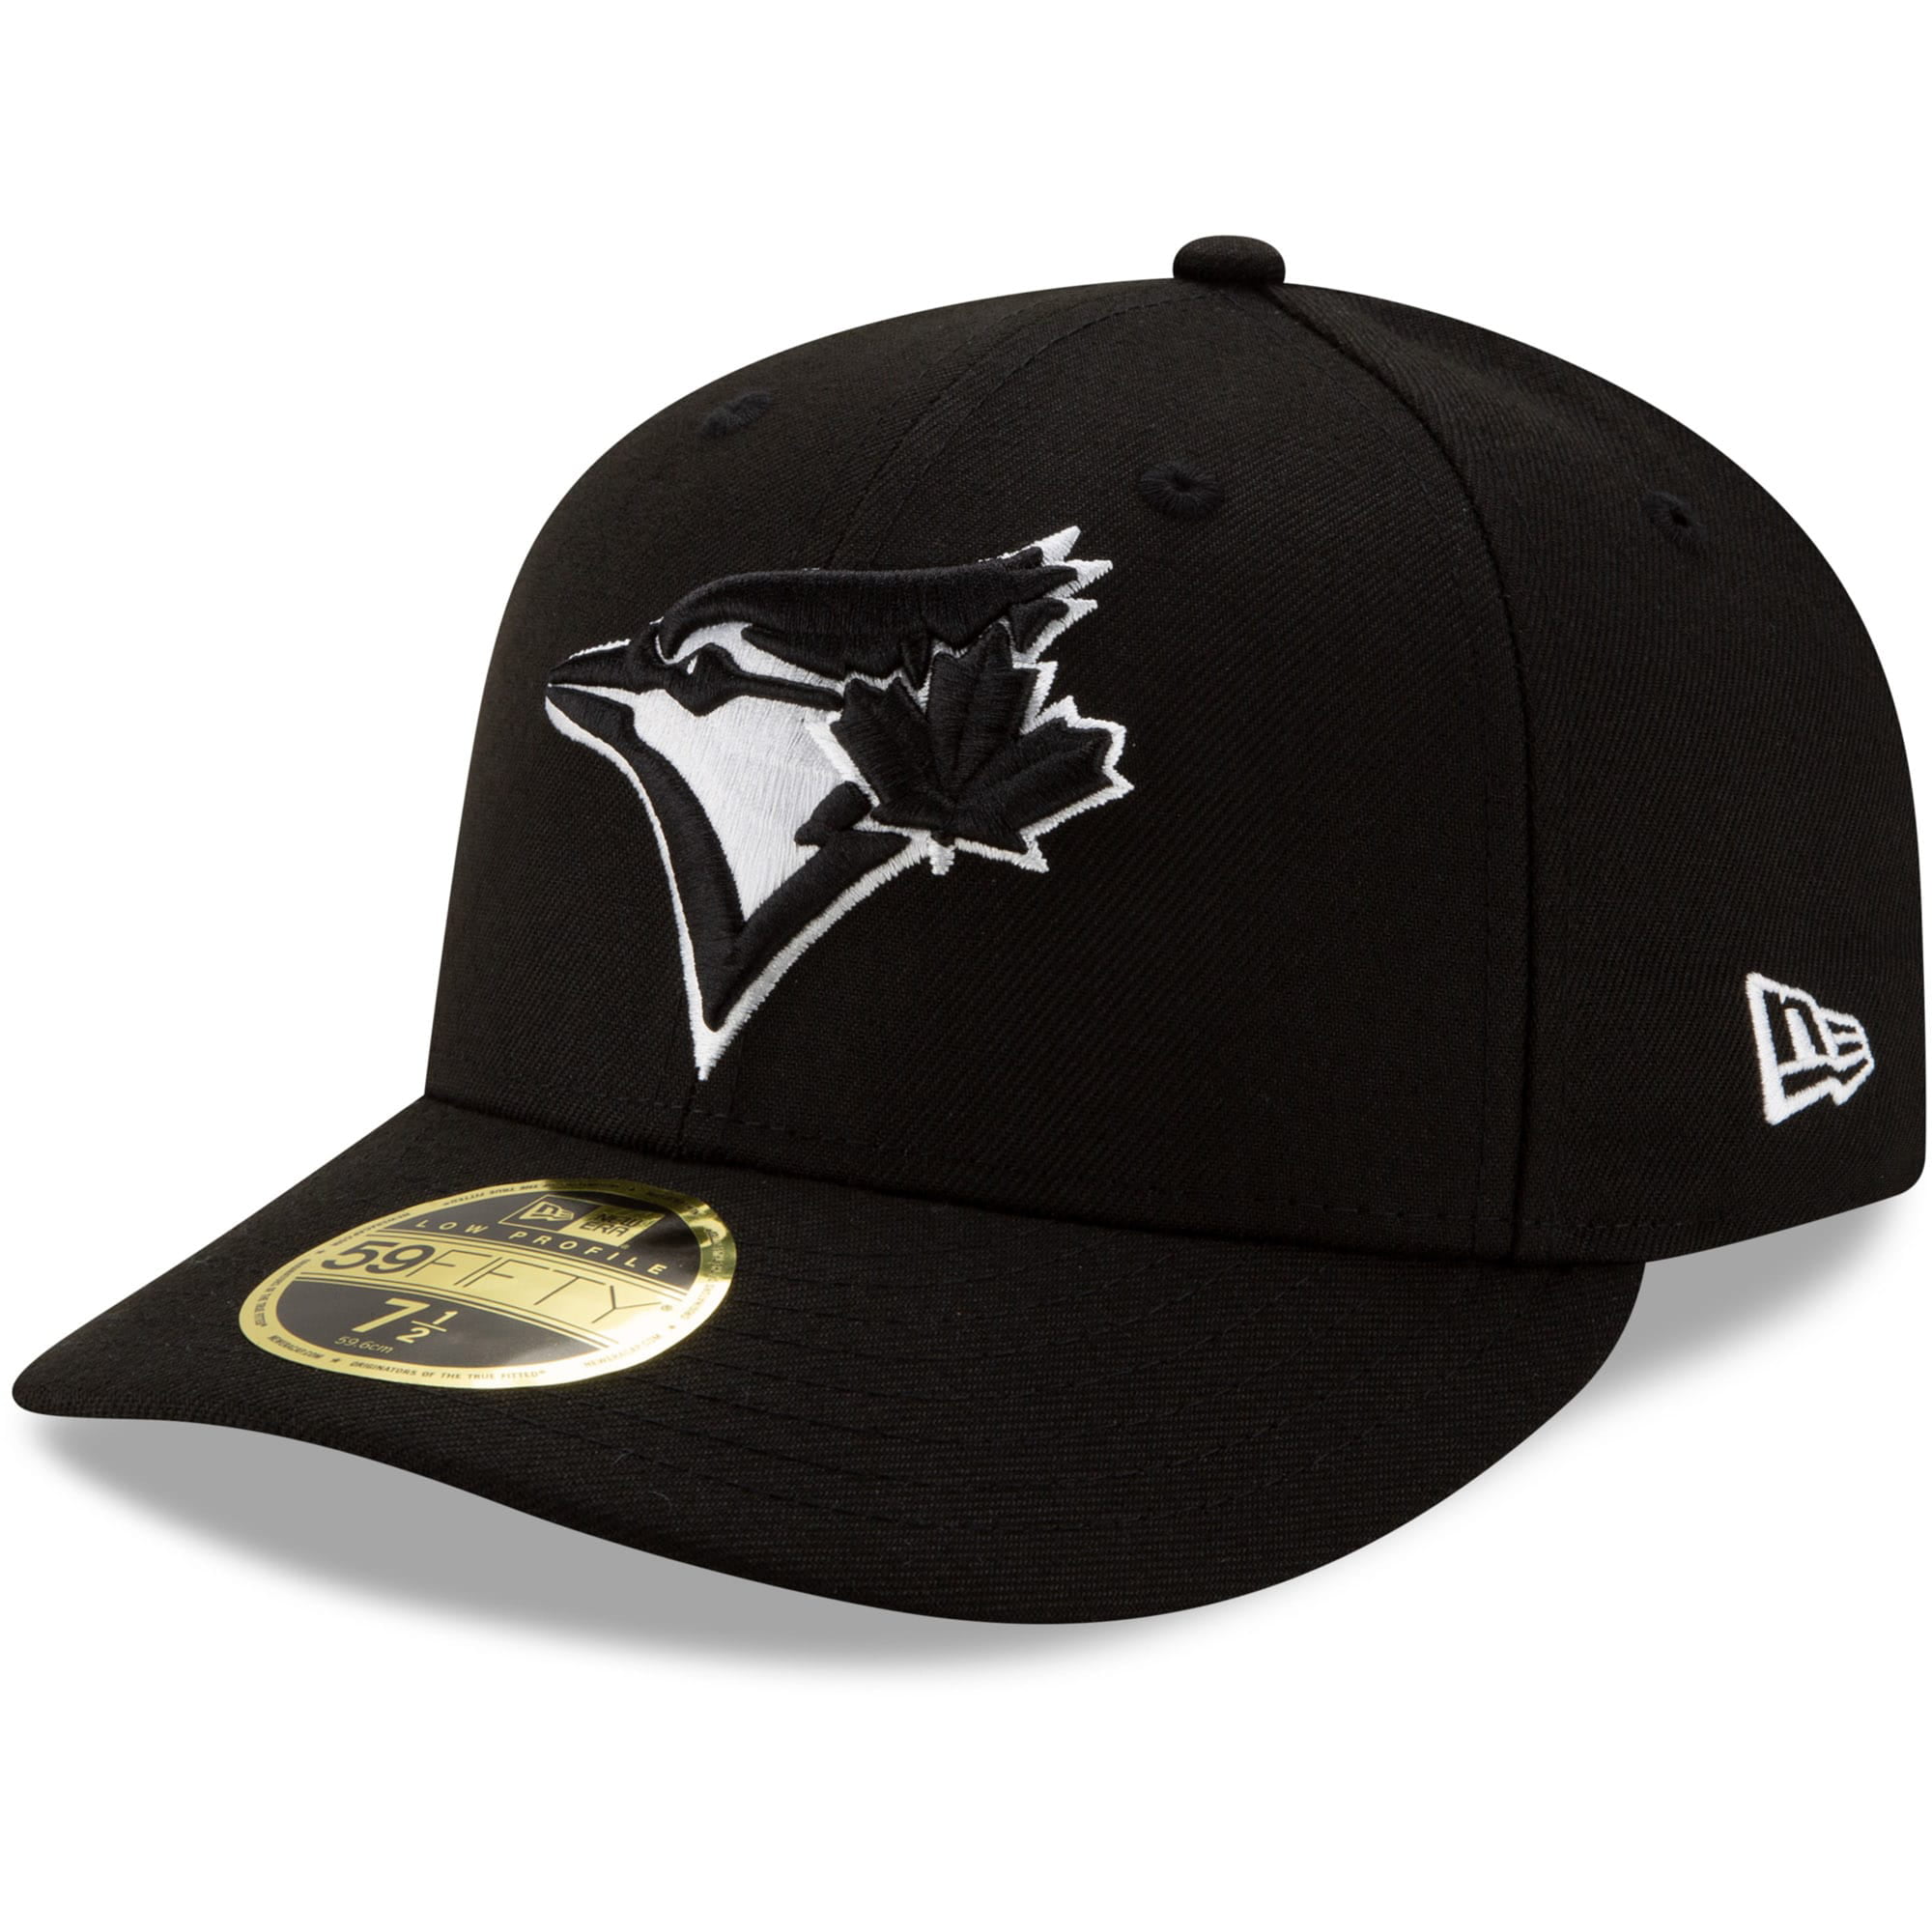 New Era Toronto Blue Jays Black On Black 59fifty Fitted Cap Limited Edition